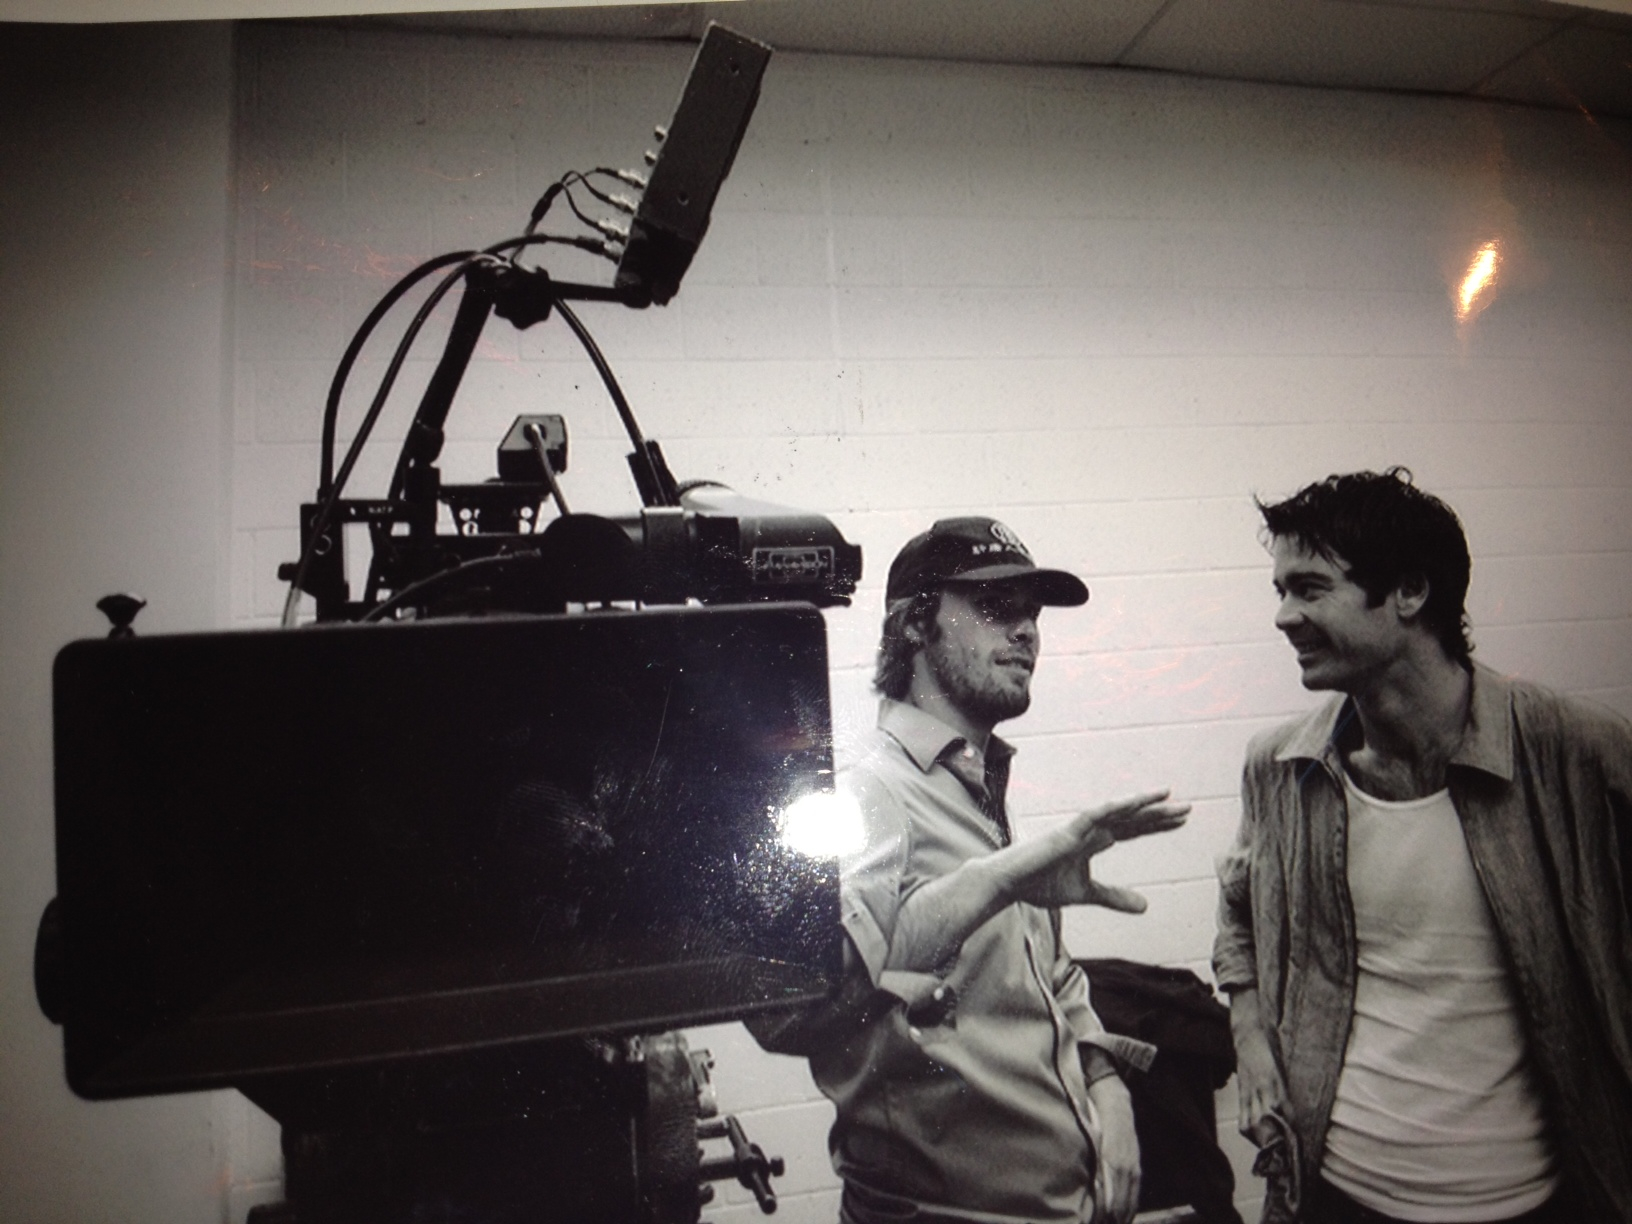 Adam Edwards (right) and Jamie White (left) at Panavision in Hollywood, CA